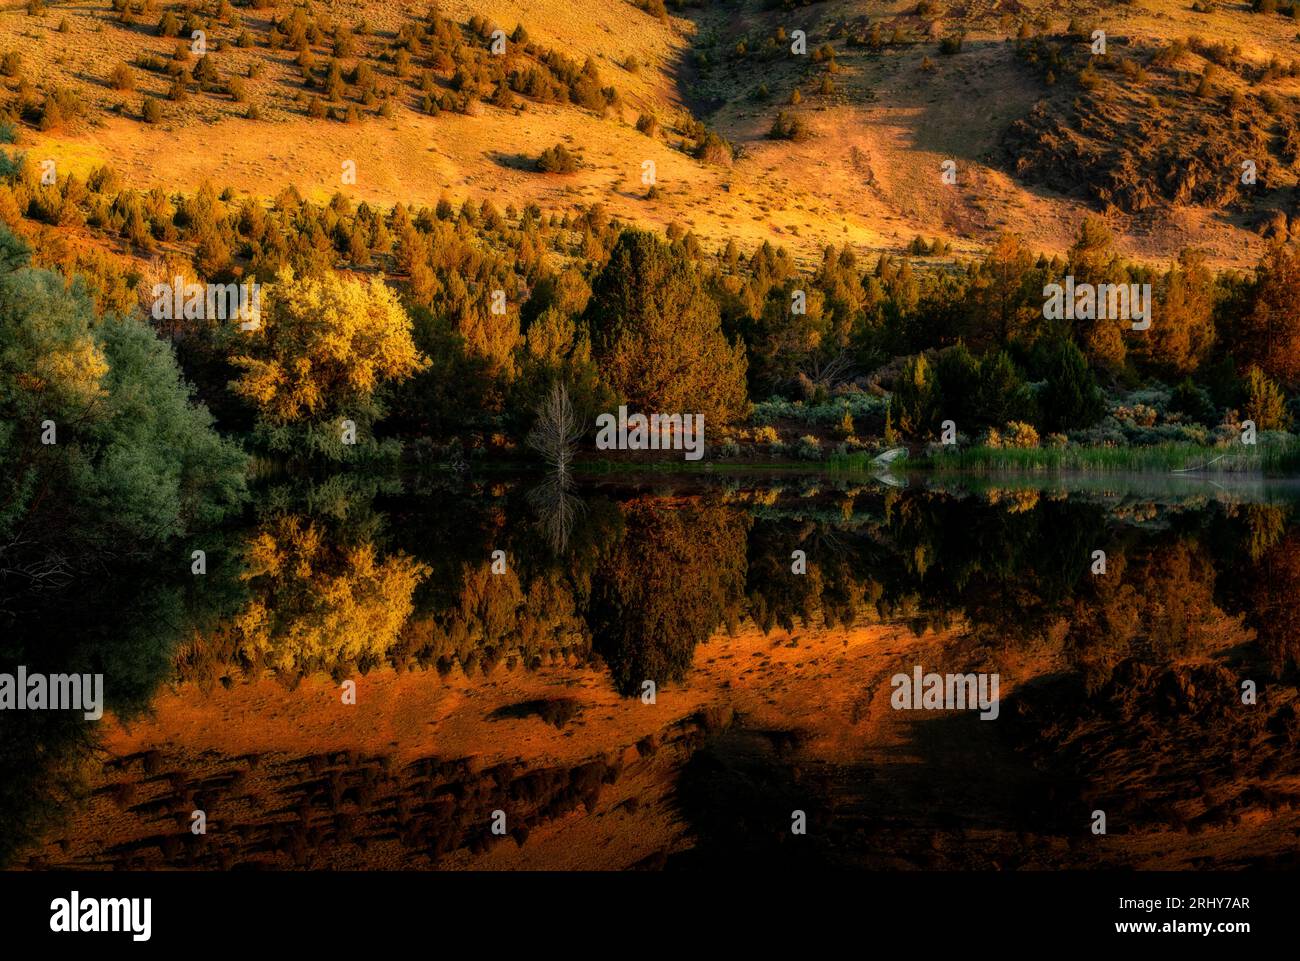 The pond at the Summer Lake Lodge reflects the surrounding hillside as it is illuminated by the rising sun. Stock Photo